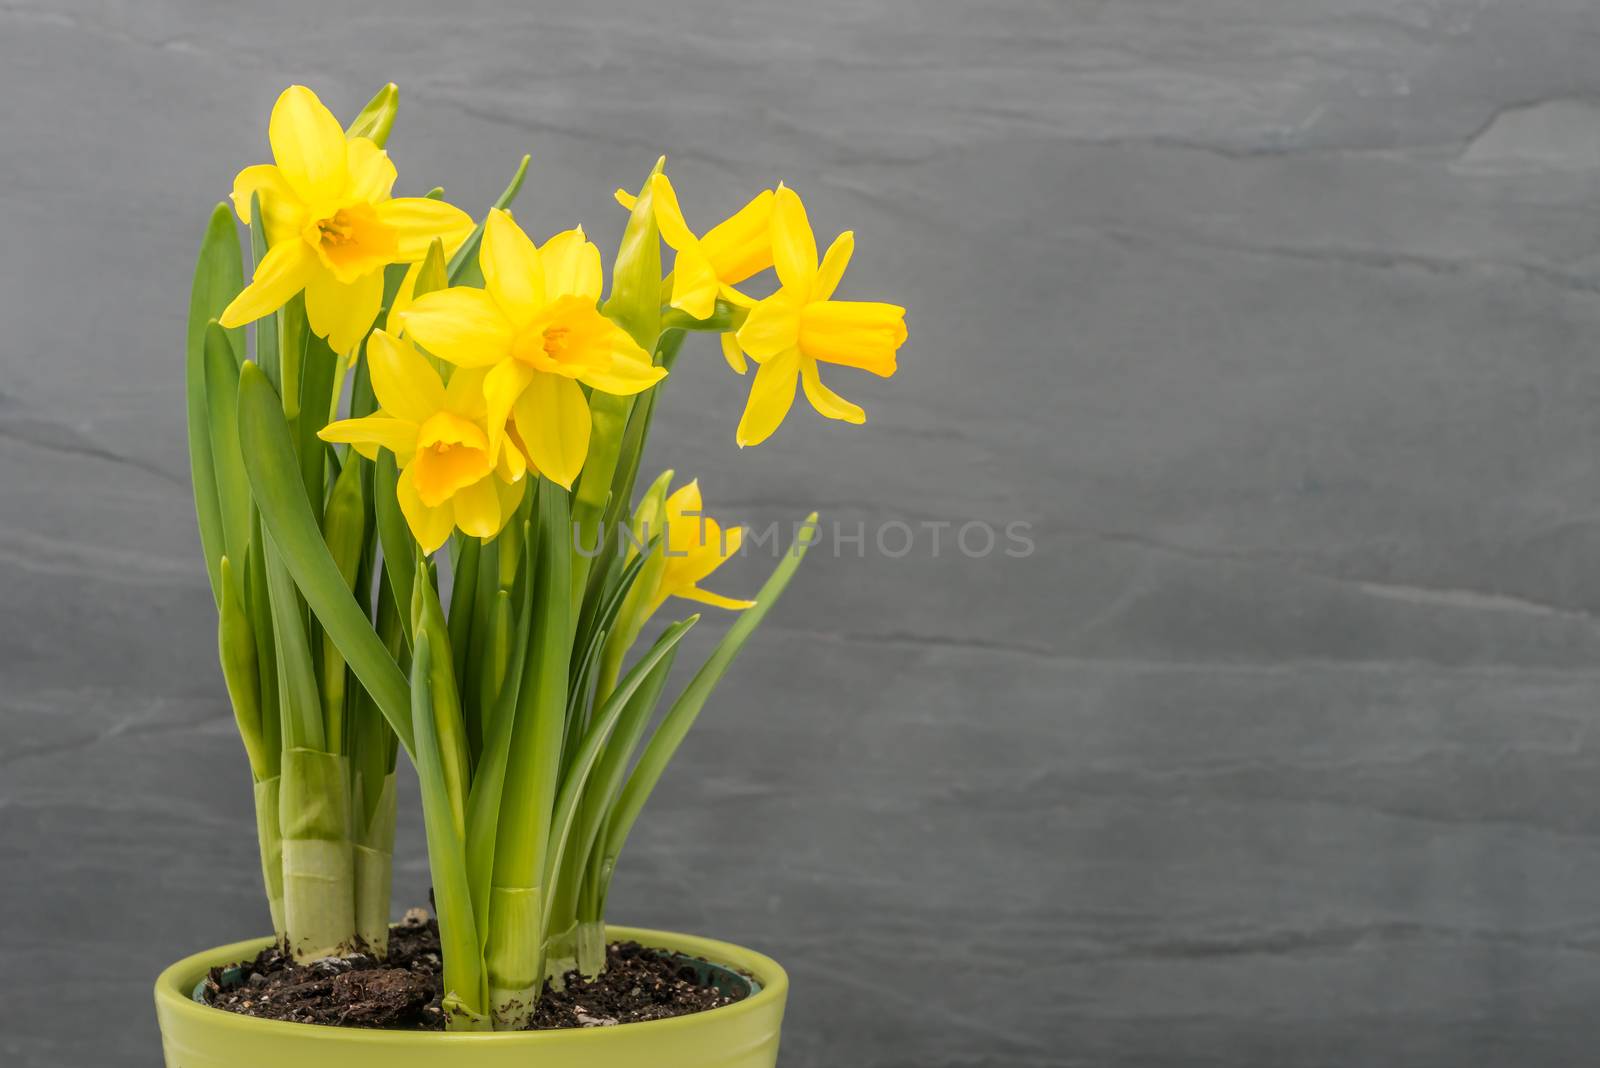 Daffodils on Gray Background by billberryphotography